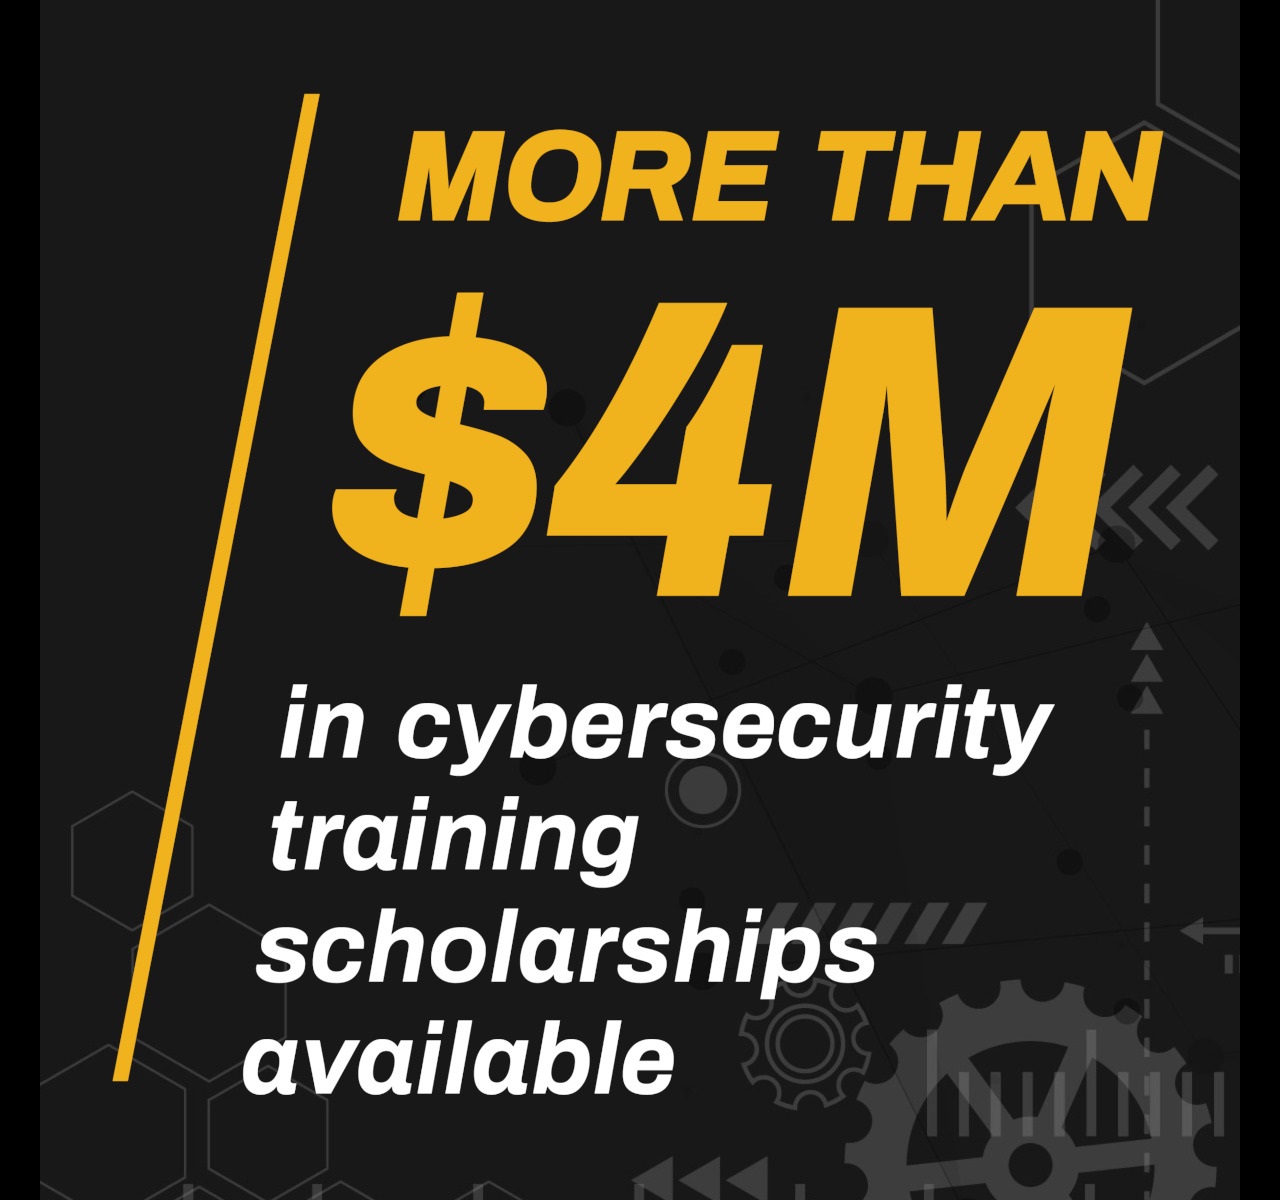 More than four-million in cybersecurity training scholarships available.